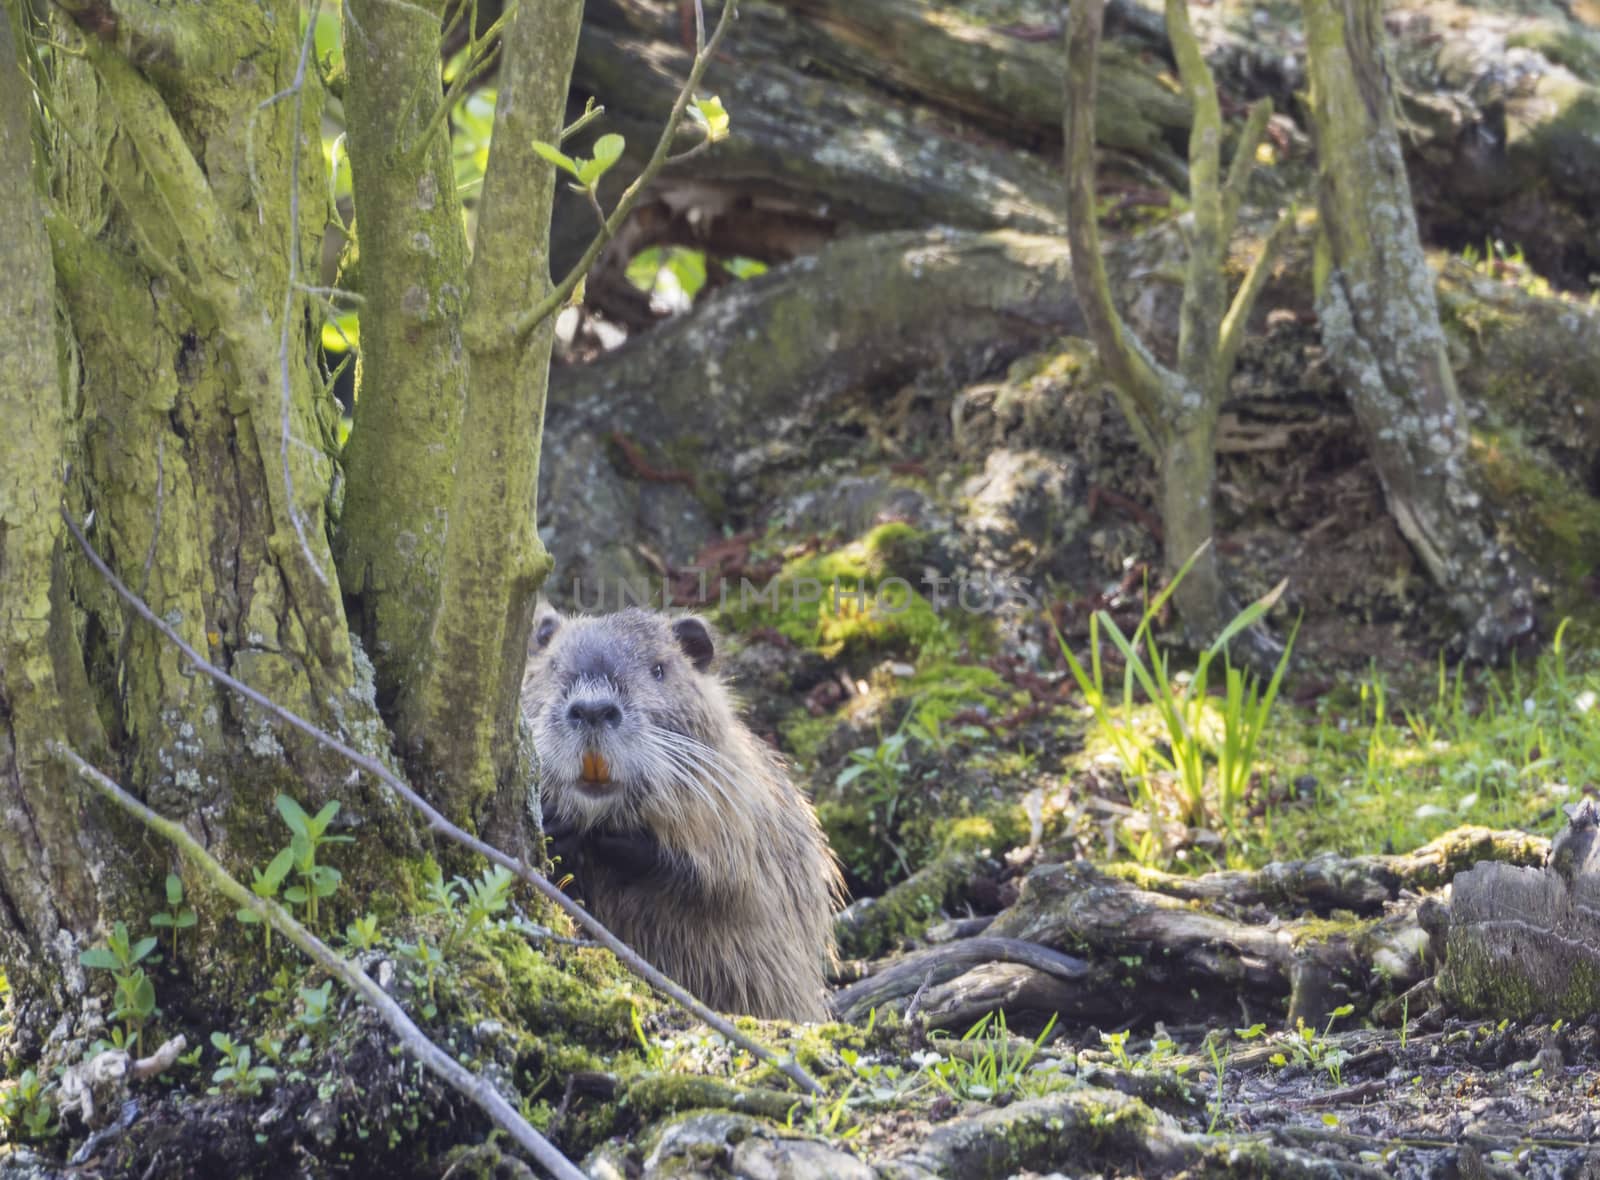  muskrat (Ondatra zibethicus) looking up from mossy trees and gr by Henkeova